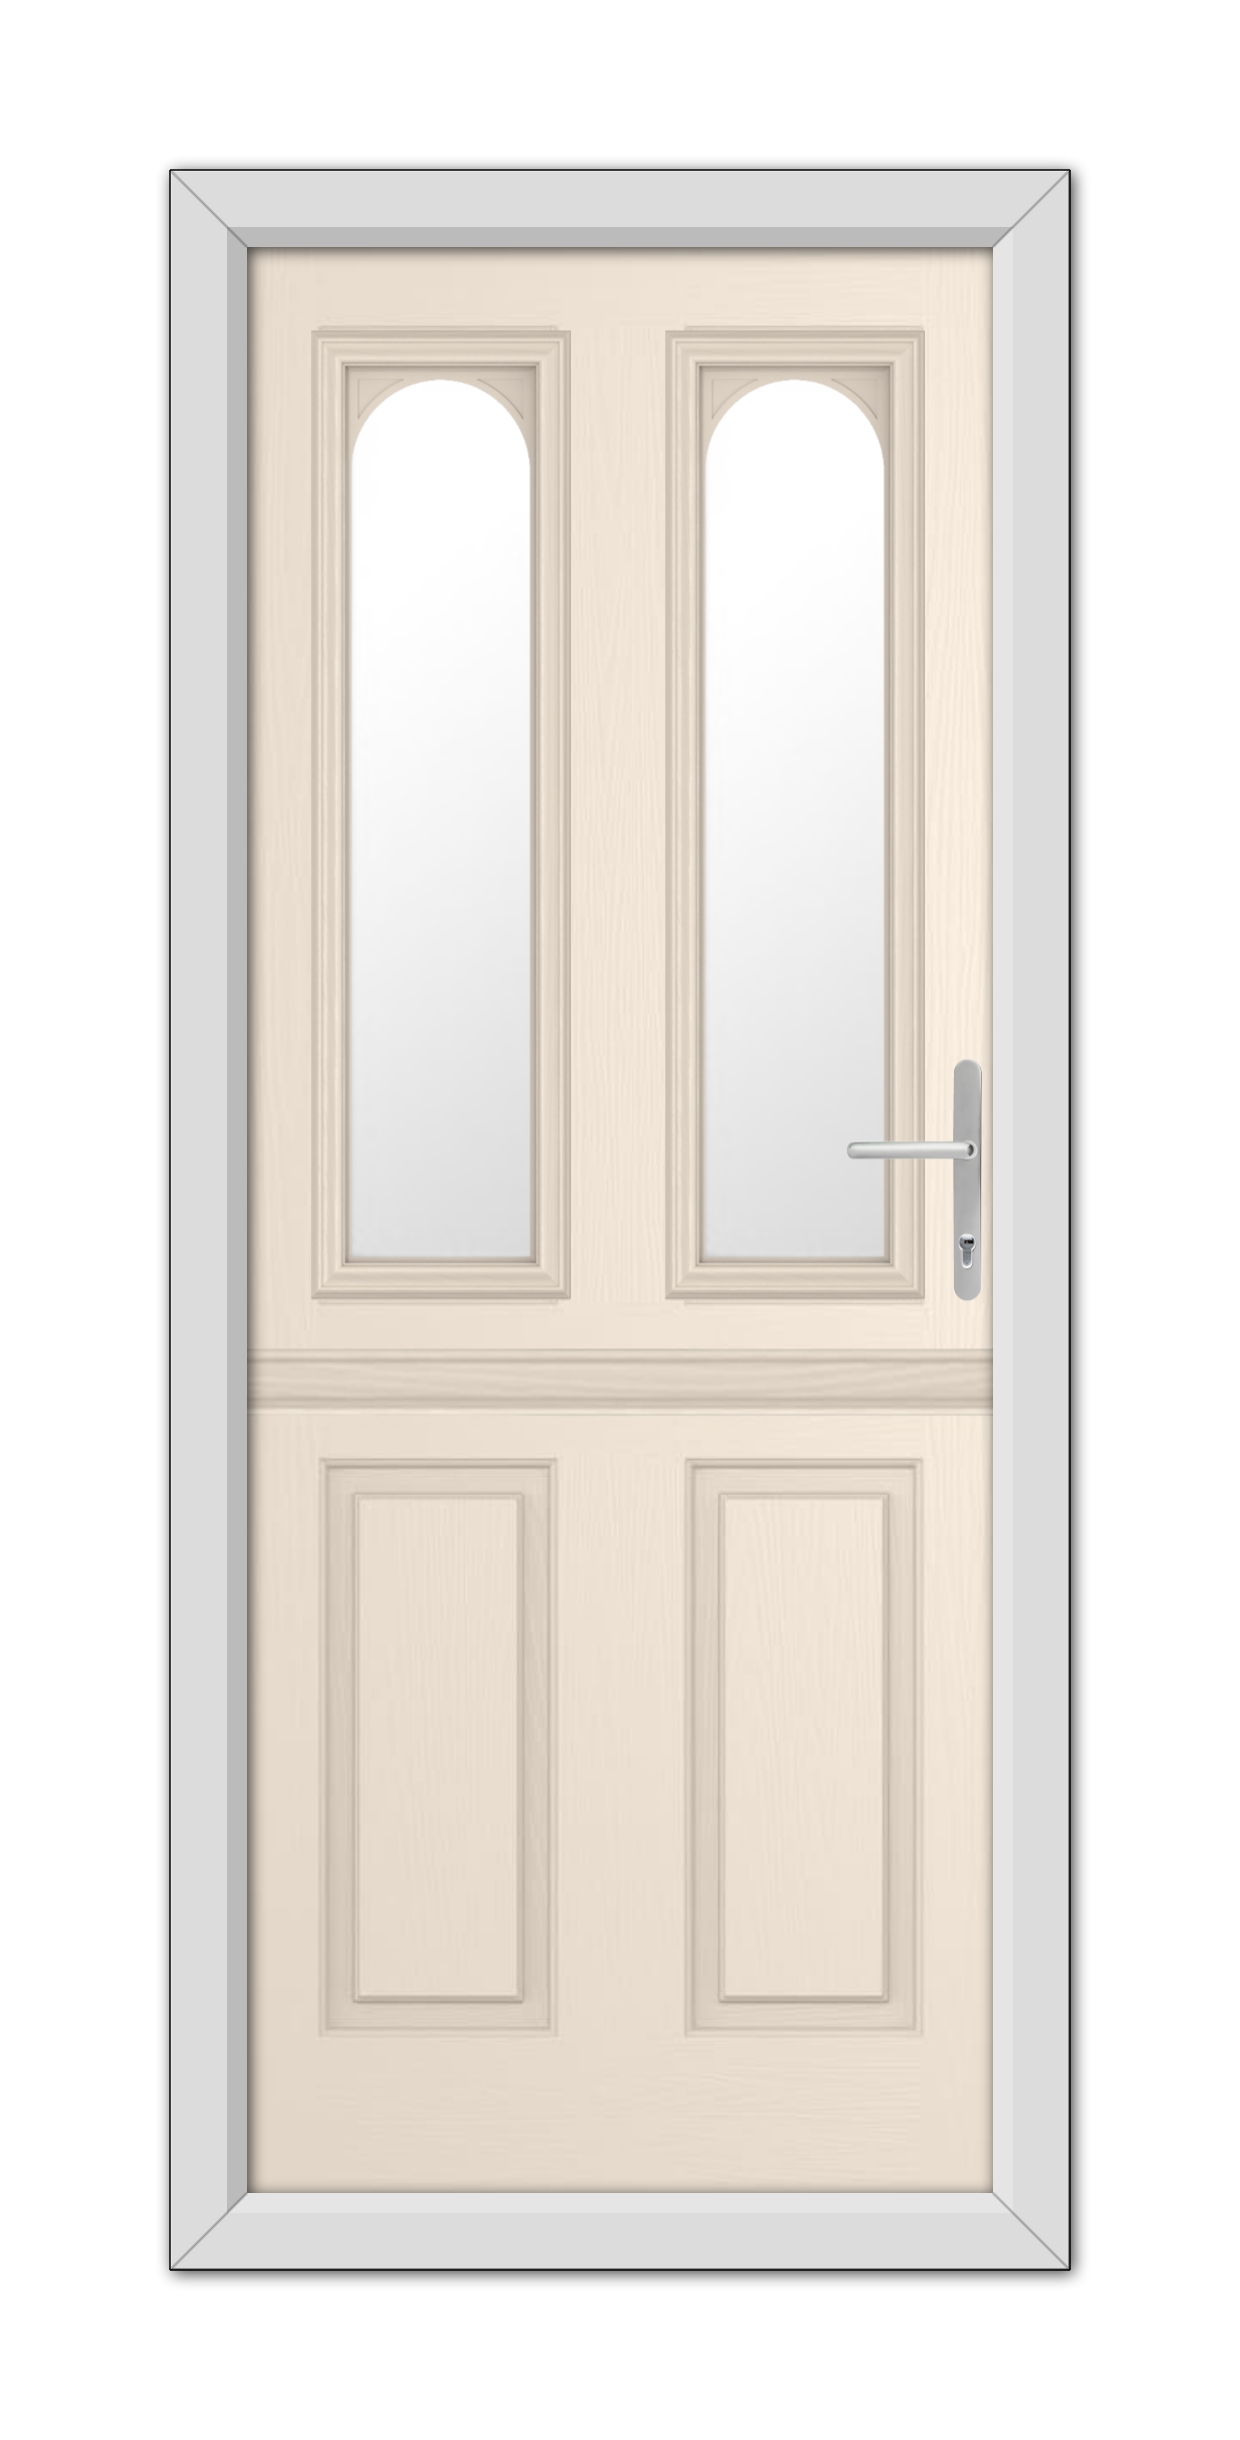 A modern Cream Elmhurst Stable Composite Door 48mm Timber Core with glass panels on the top half and wooden panels on the bottom, featuring a minimalist handle, set in a simple frame.